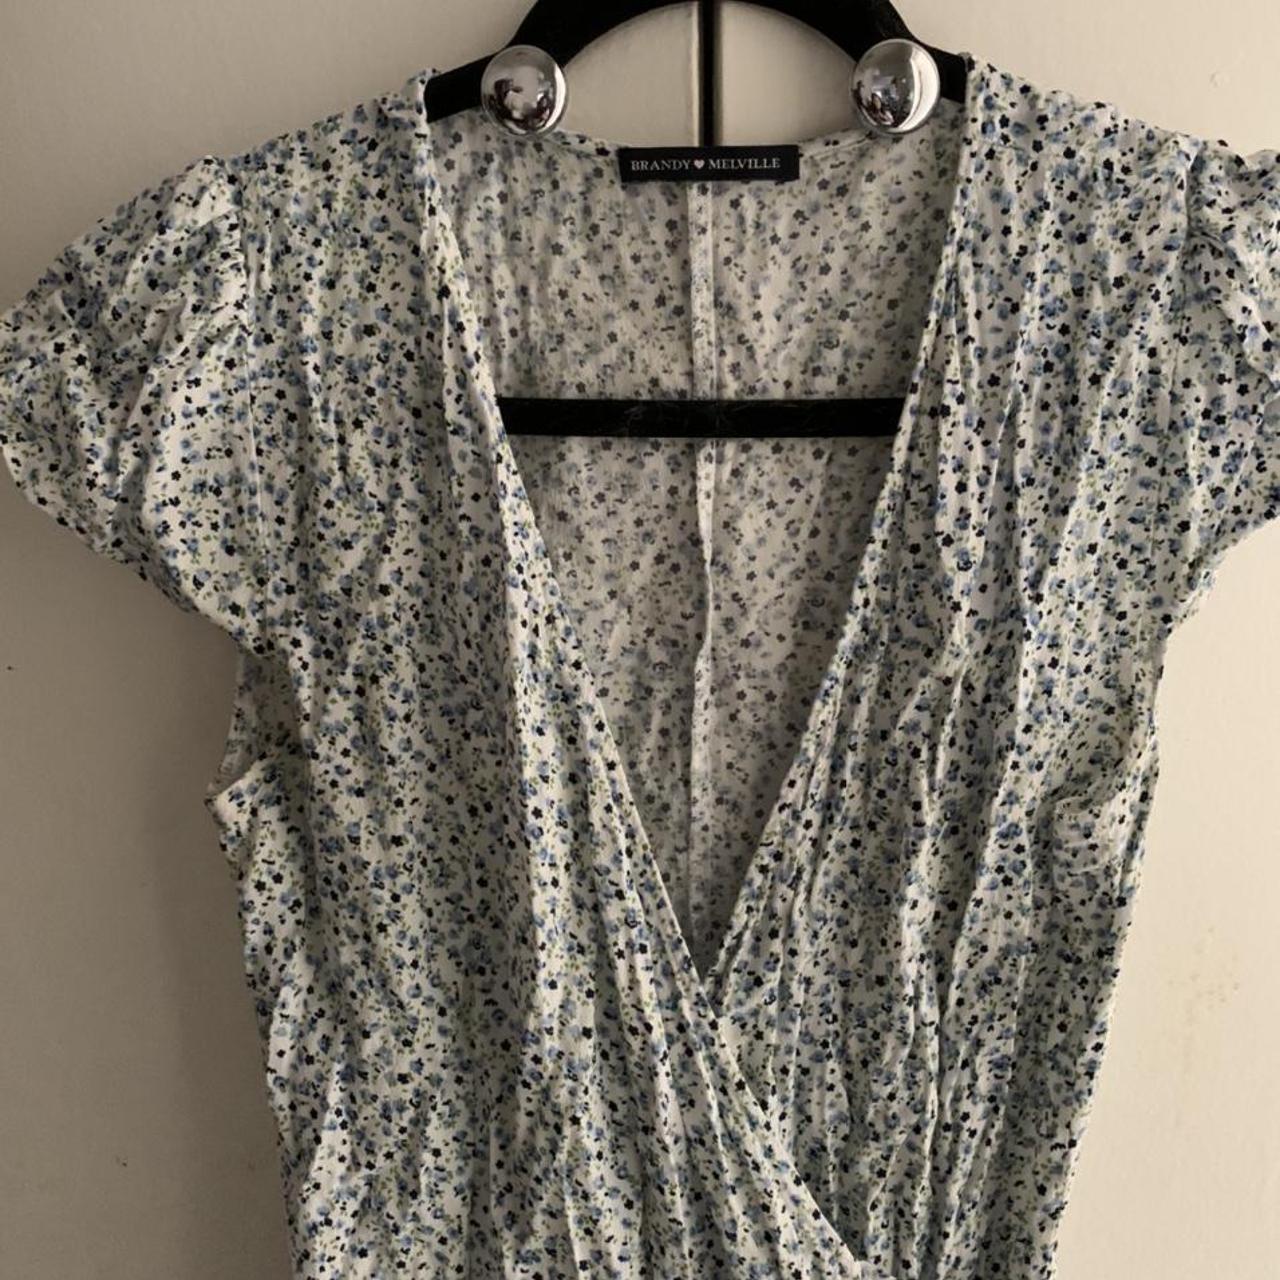 Product Image 2 - NWOT brandy Melville dress with